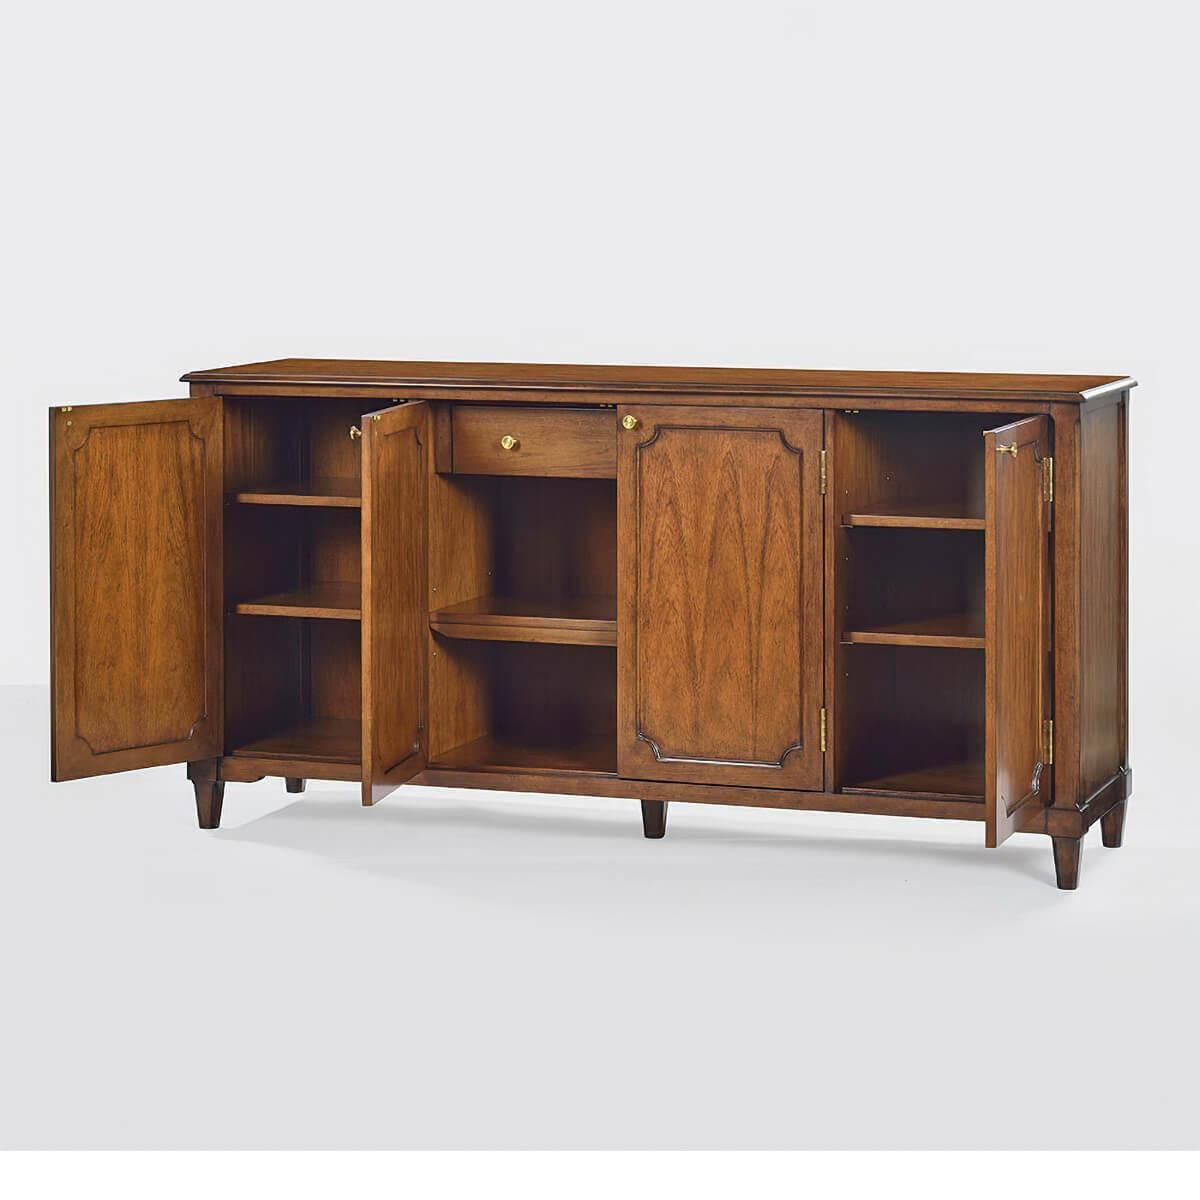 A modern walnut finish buffet with a smooth top, four doors with portrait profile, one large interior drawer, OGEE top edge, routed corner detail on the buffet sides and legs, has a “rustic” warm brown finish with subtle visual distressing and